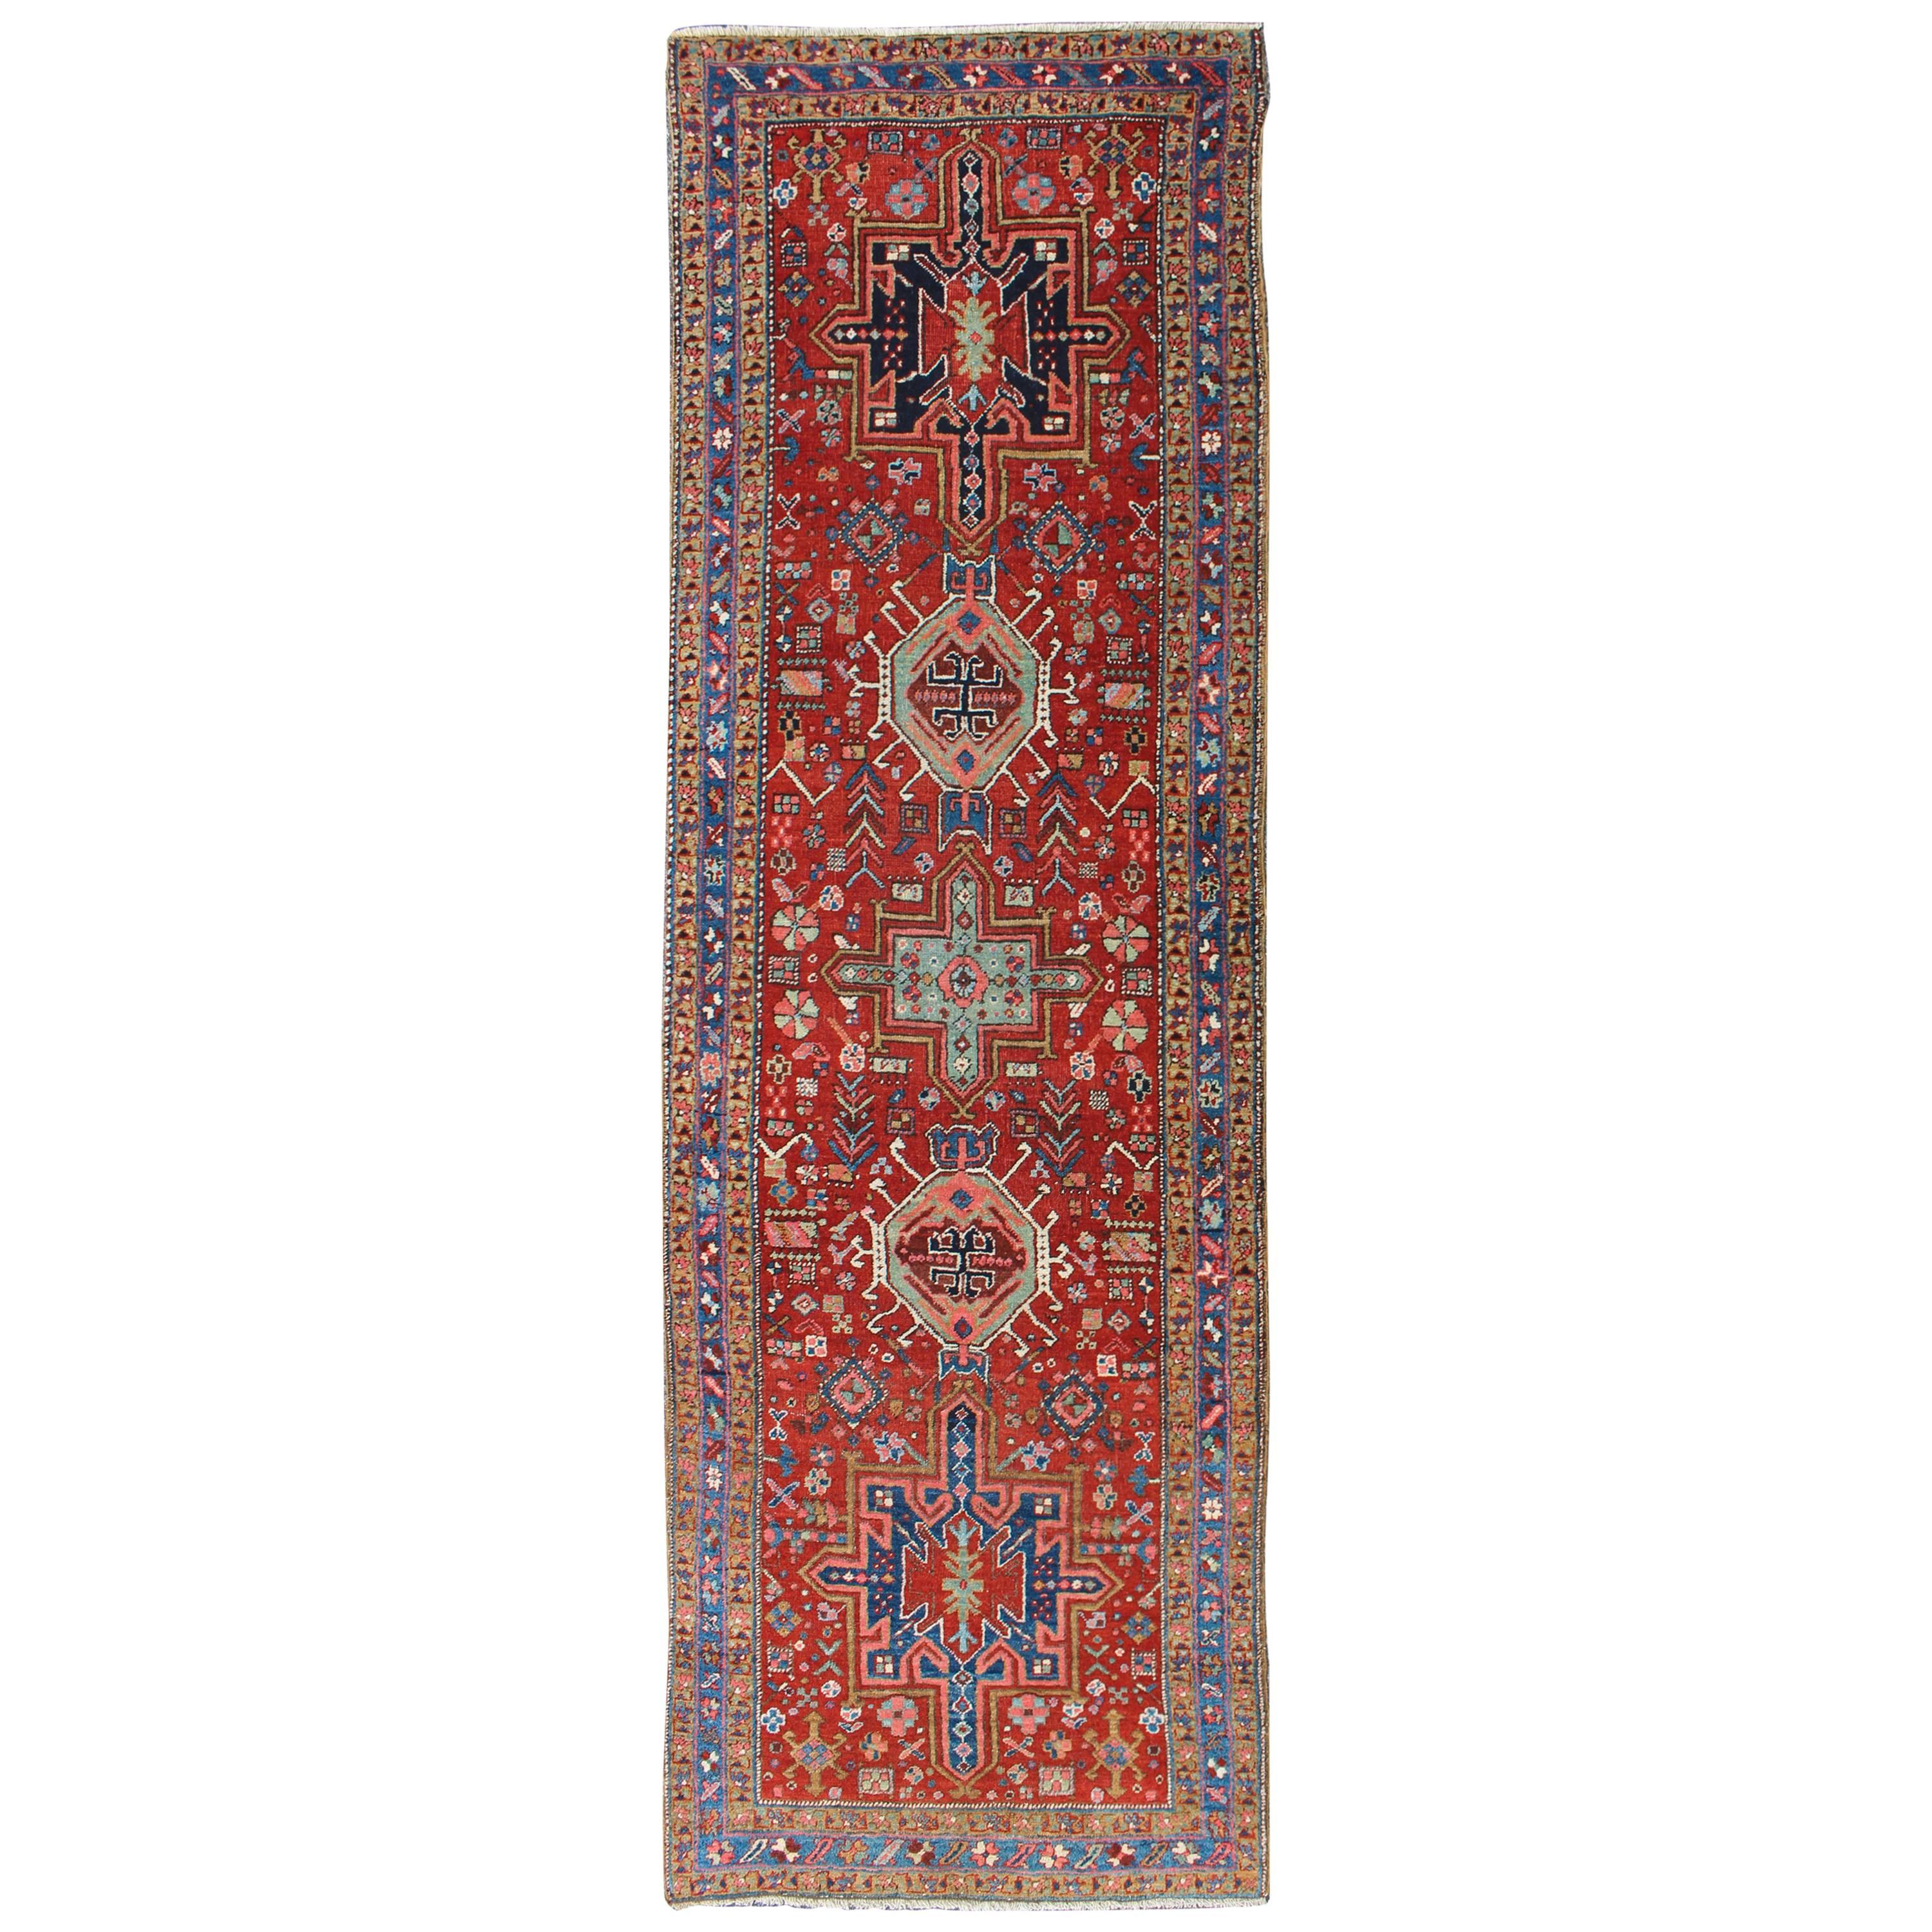 Antique Heriz Serapi Runner with Colorful Highly Stylized Geometric Design